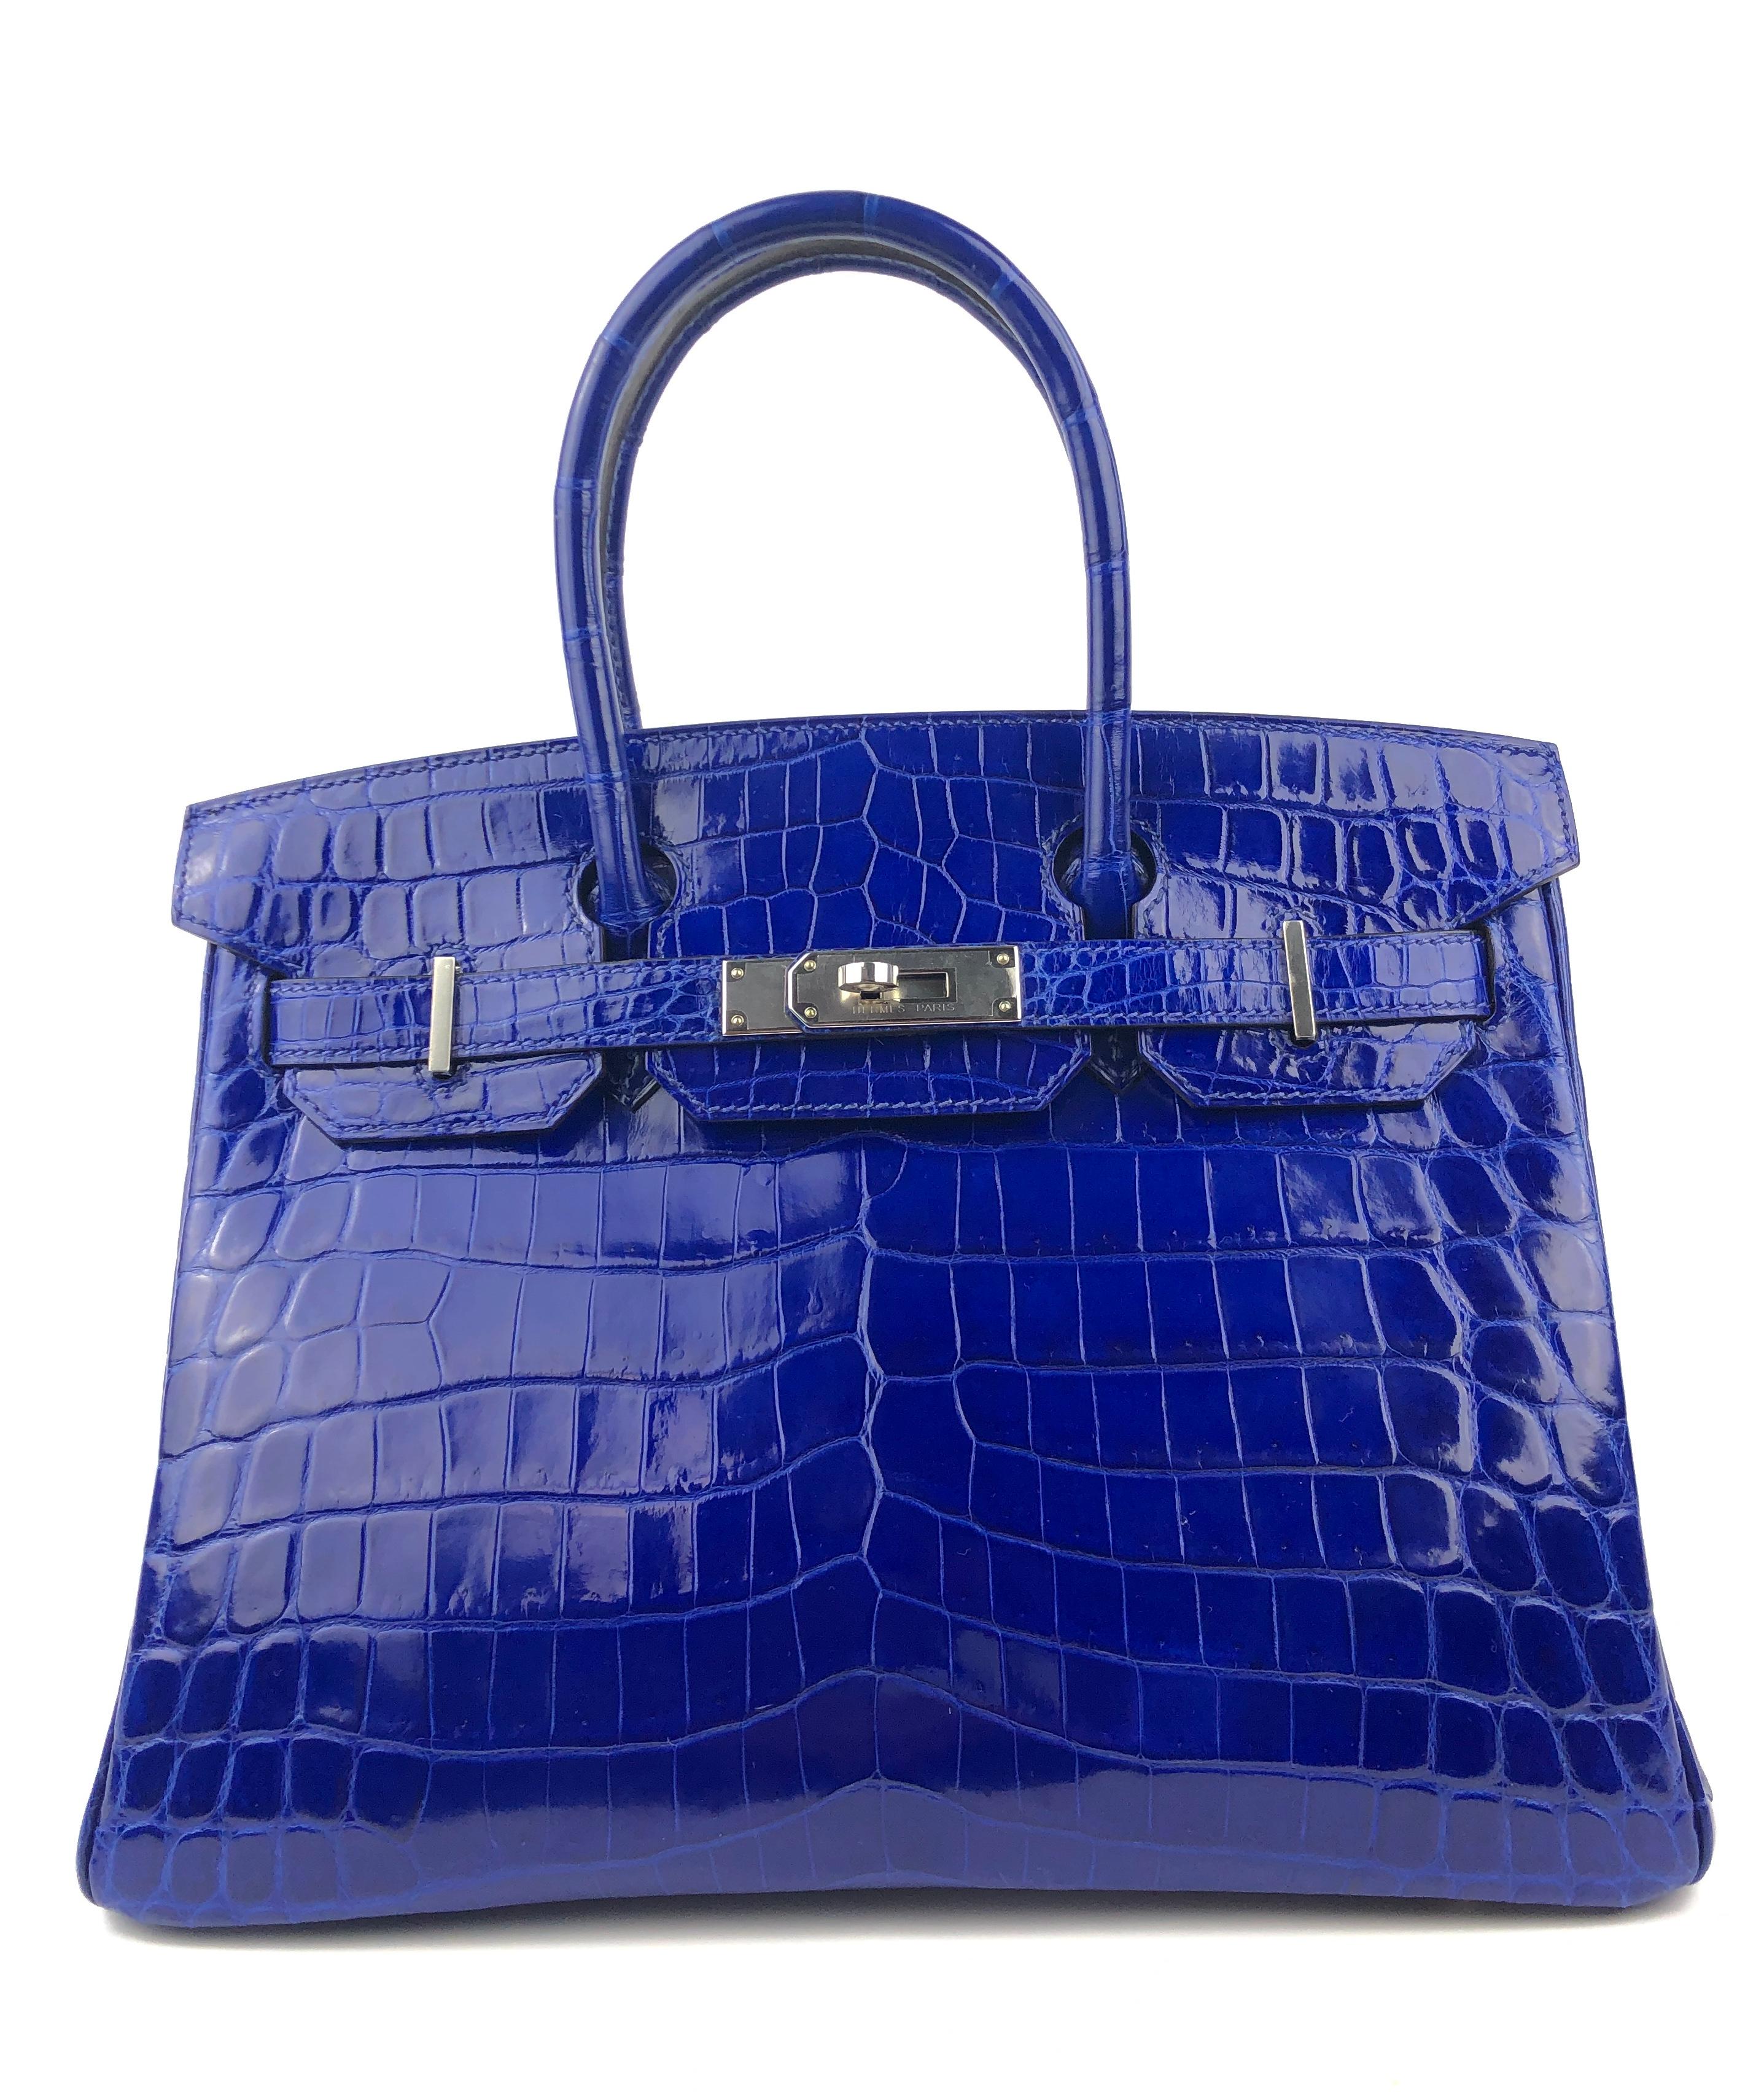 Stunning Hermes Birkin 30 Blue Electric Shinny Niloticus Crocodile Palladium Hardware. Excellent Condition, Plastic on Hardware, Perfect corners and Structure. Q Stamp 2013.

Shop with Confidence from Lux Addicts. Authenticity Guaranteed!